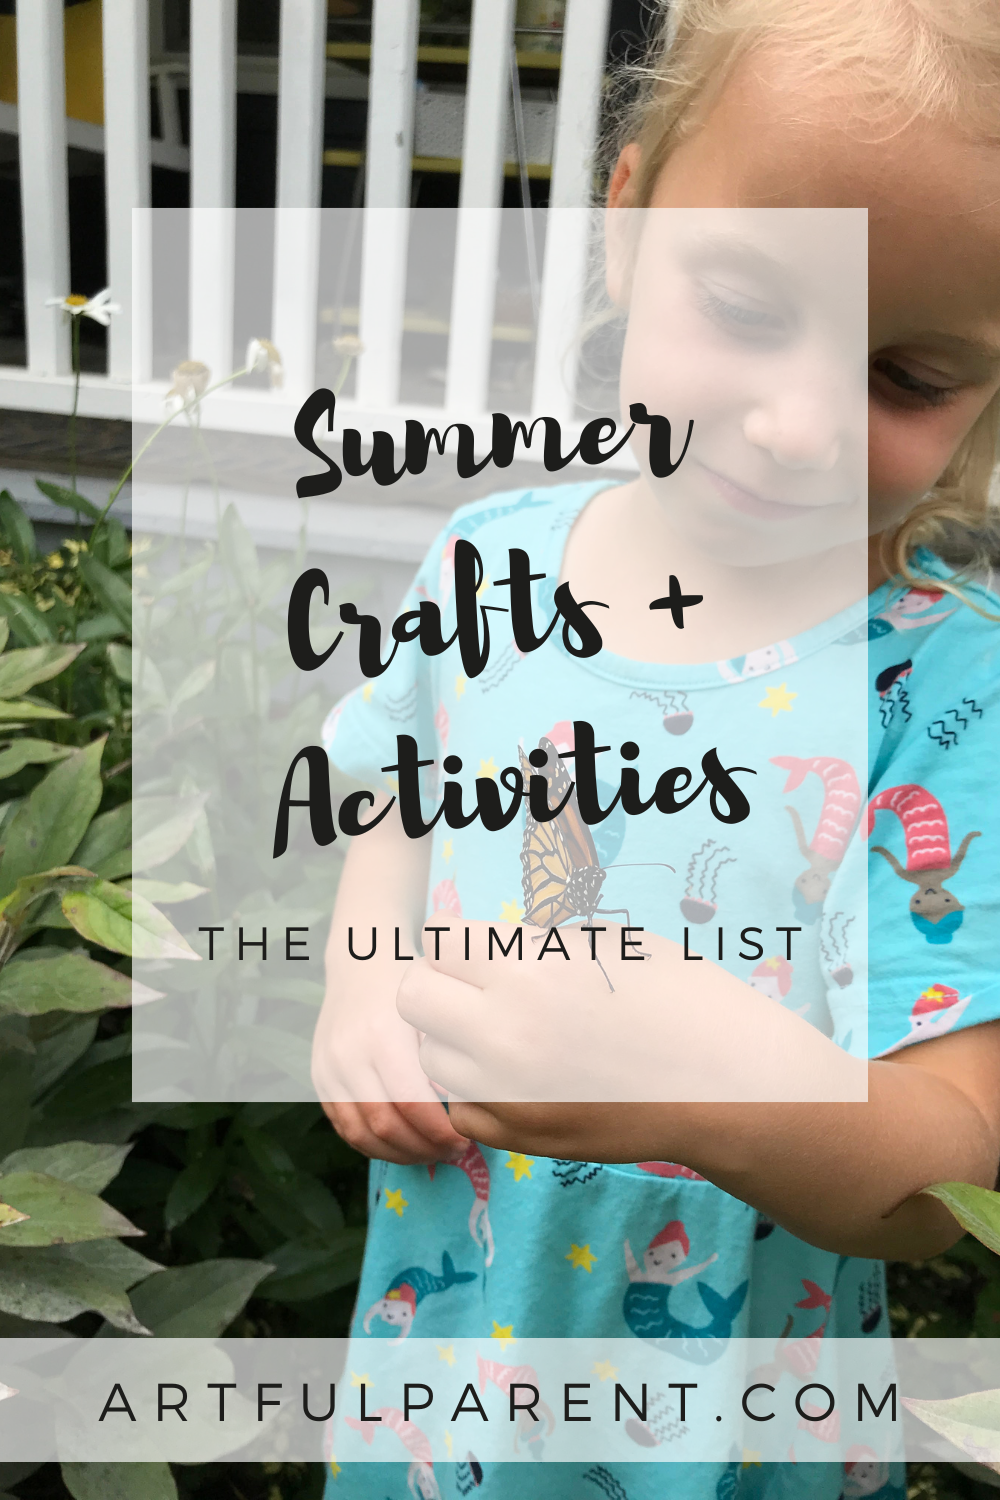 The Ultimate List of Summer Crafts & Activities for Kids